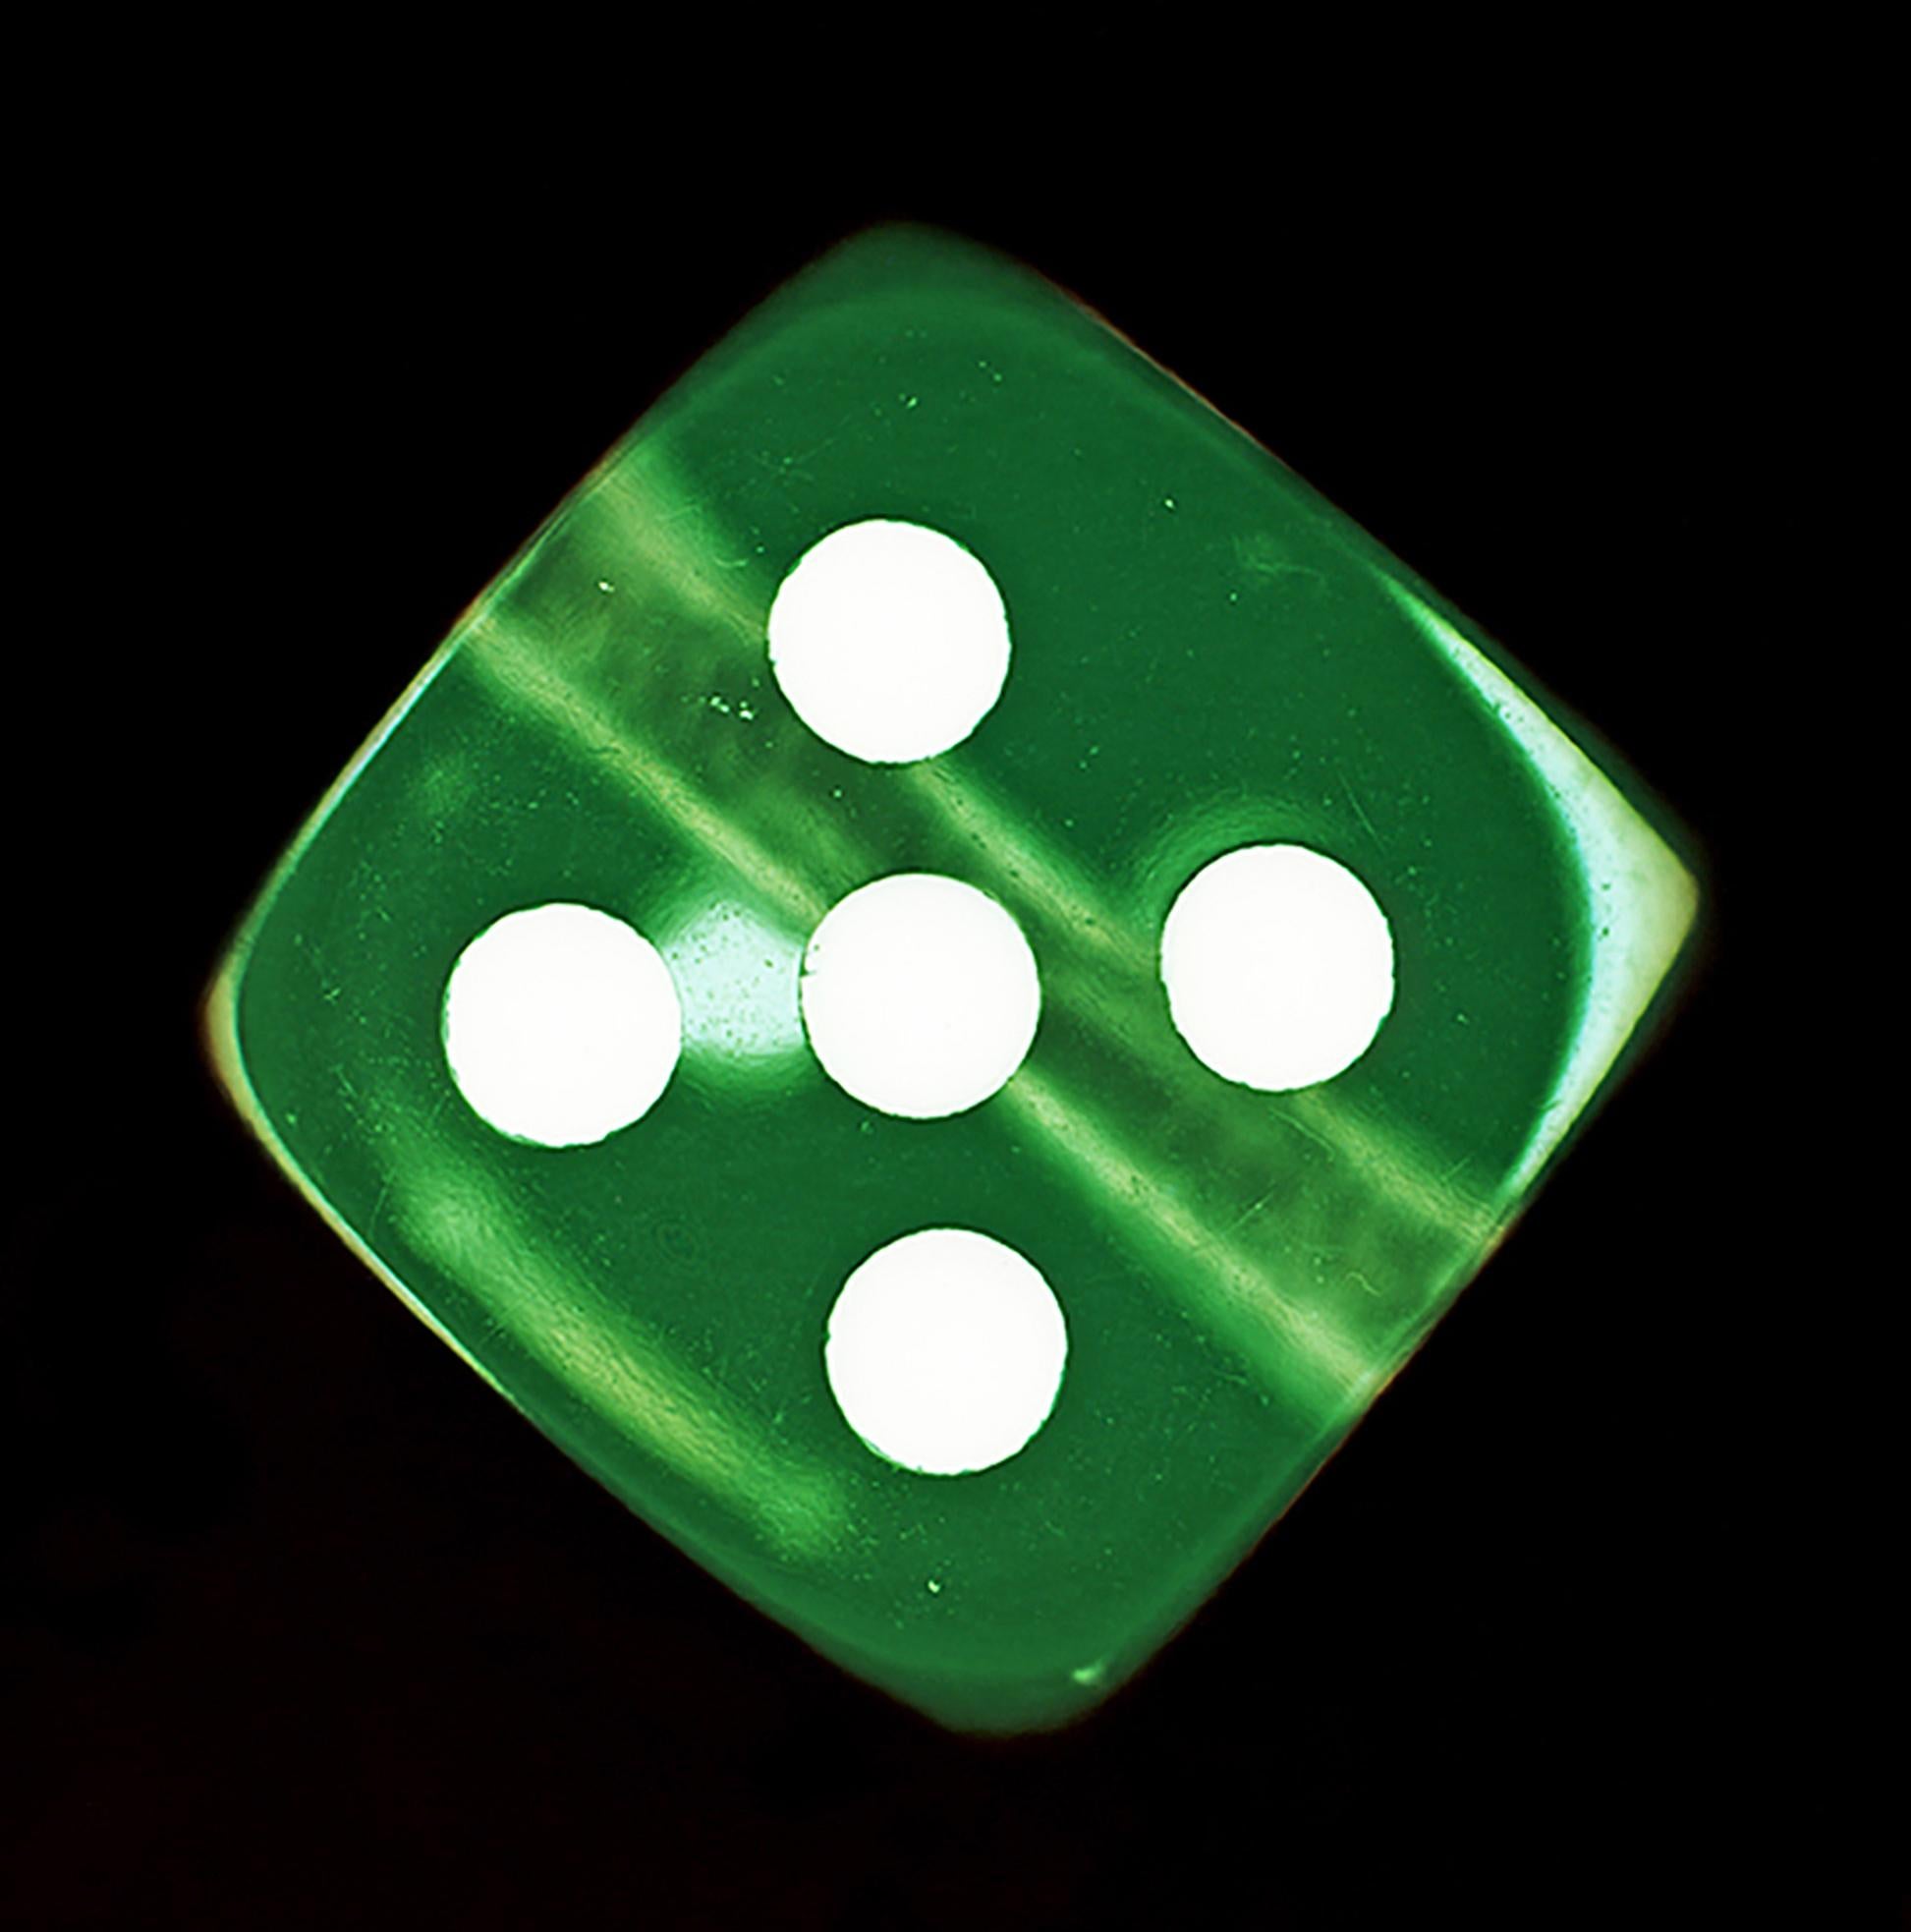 Heidler & Heeps Dice Series - Five Dice Green.

Hypnotically curious in both content and technique, viewers find themselves pleasantly puzzled. Heidler & Heeps have developed their own dichromatic technique resulting in something, which is neither a